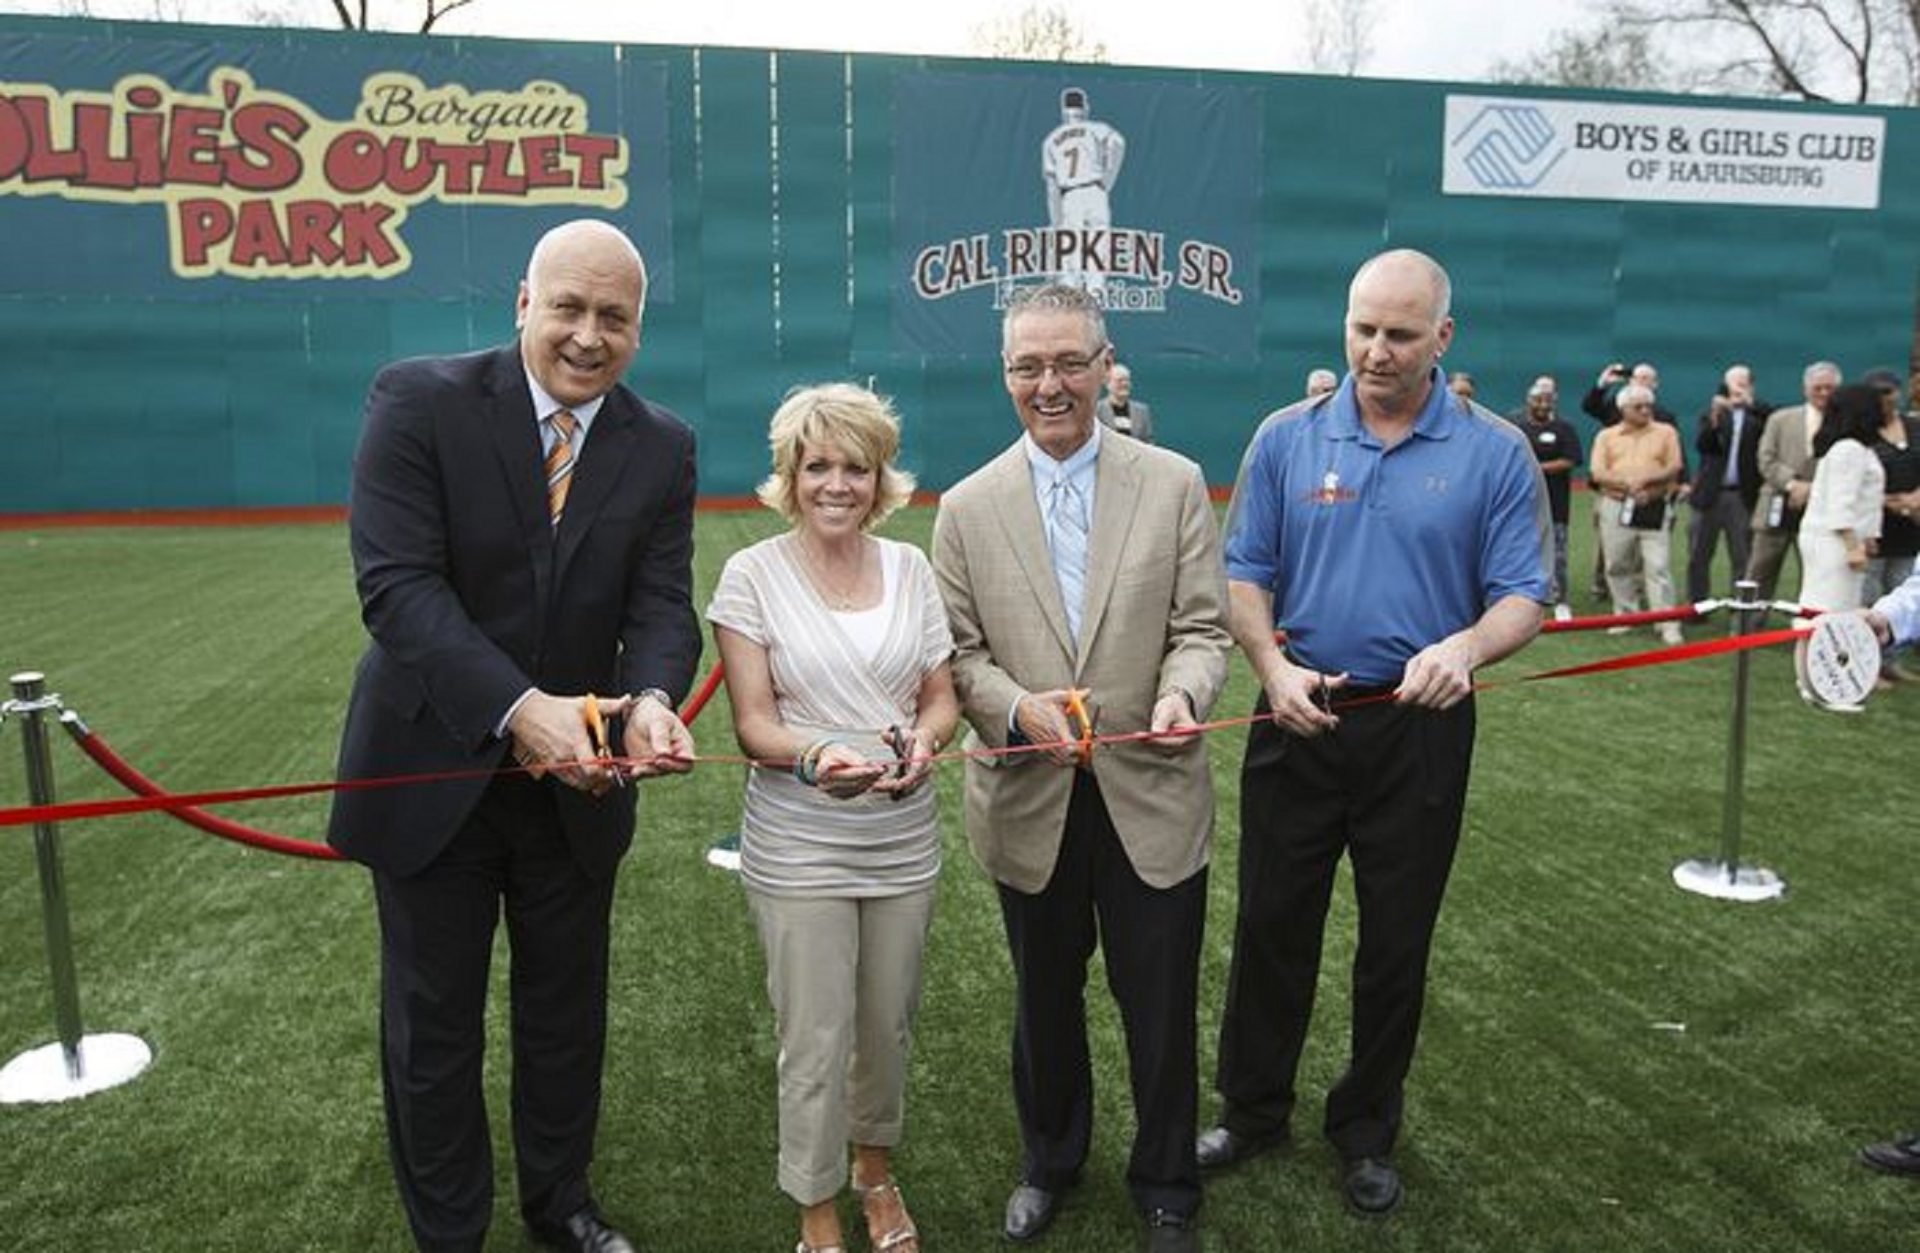 A ribbon cutting is held to commemorate the opening of the Mark and Betty Butler Field at Ollie's Bargain Outlet Park at the Boys and Girls Club of Harrisburg. Cutting the ribbon is Cal Ripken Jr., Betty Butler, husband Mark Butler, president and CEO of Ollies, and Bill Ripken. 04/10/2013